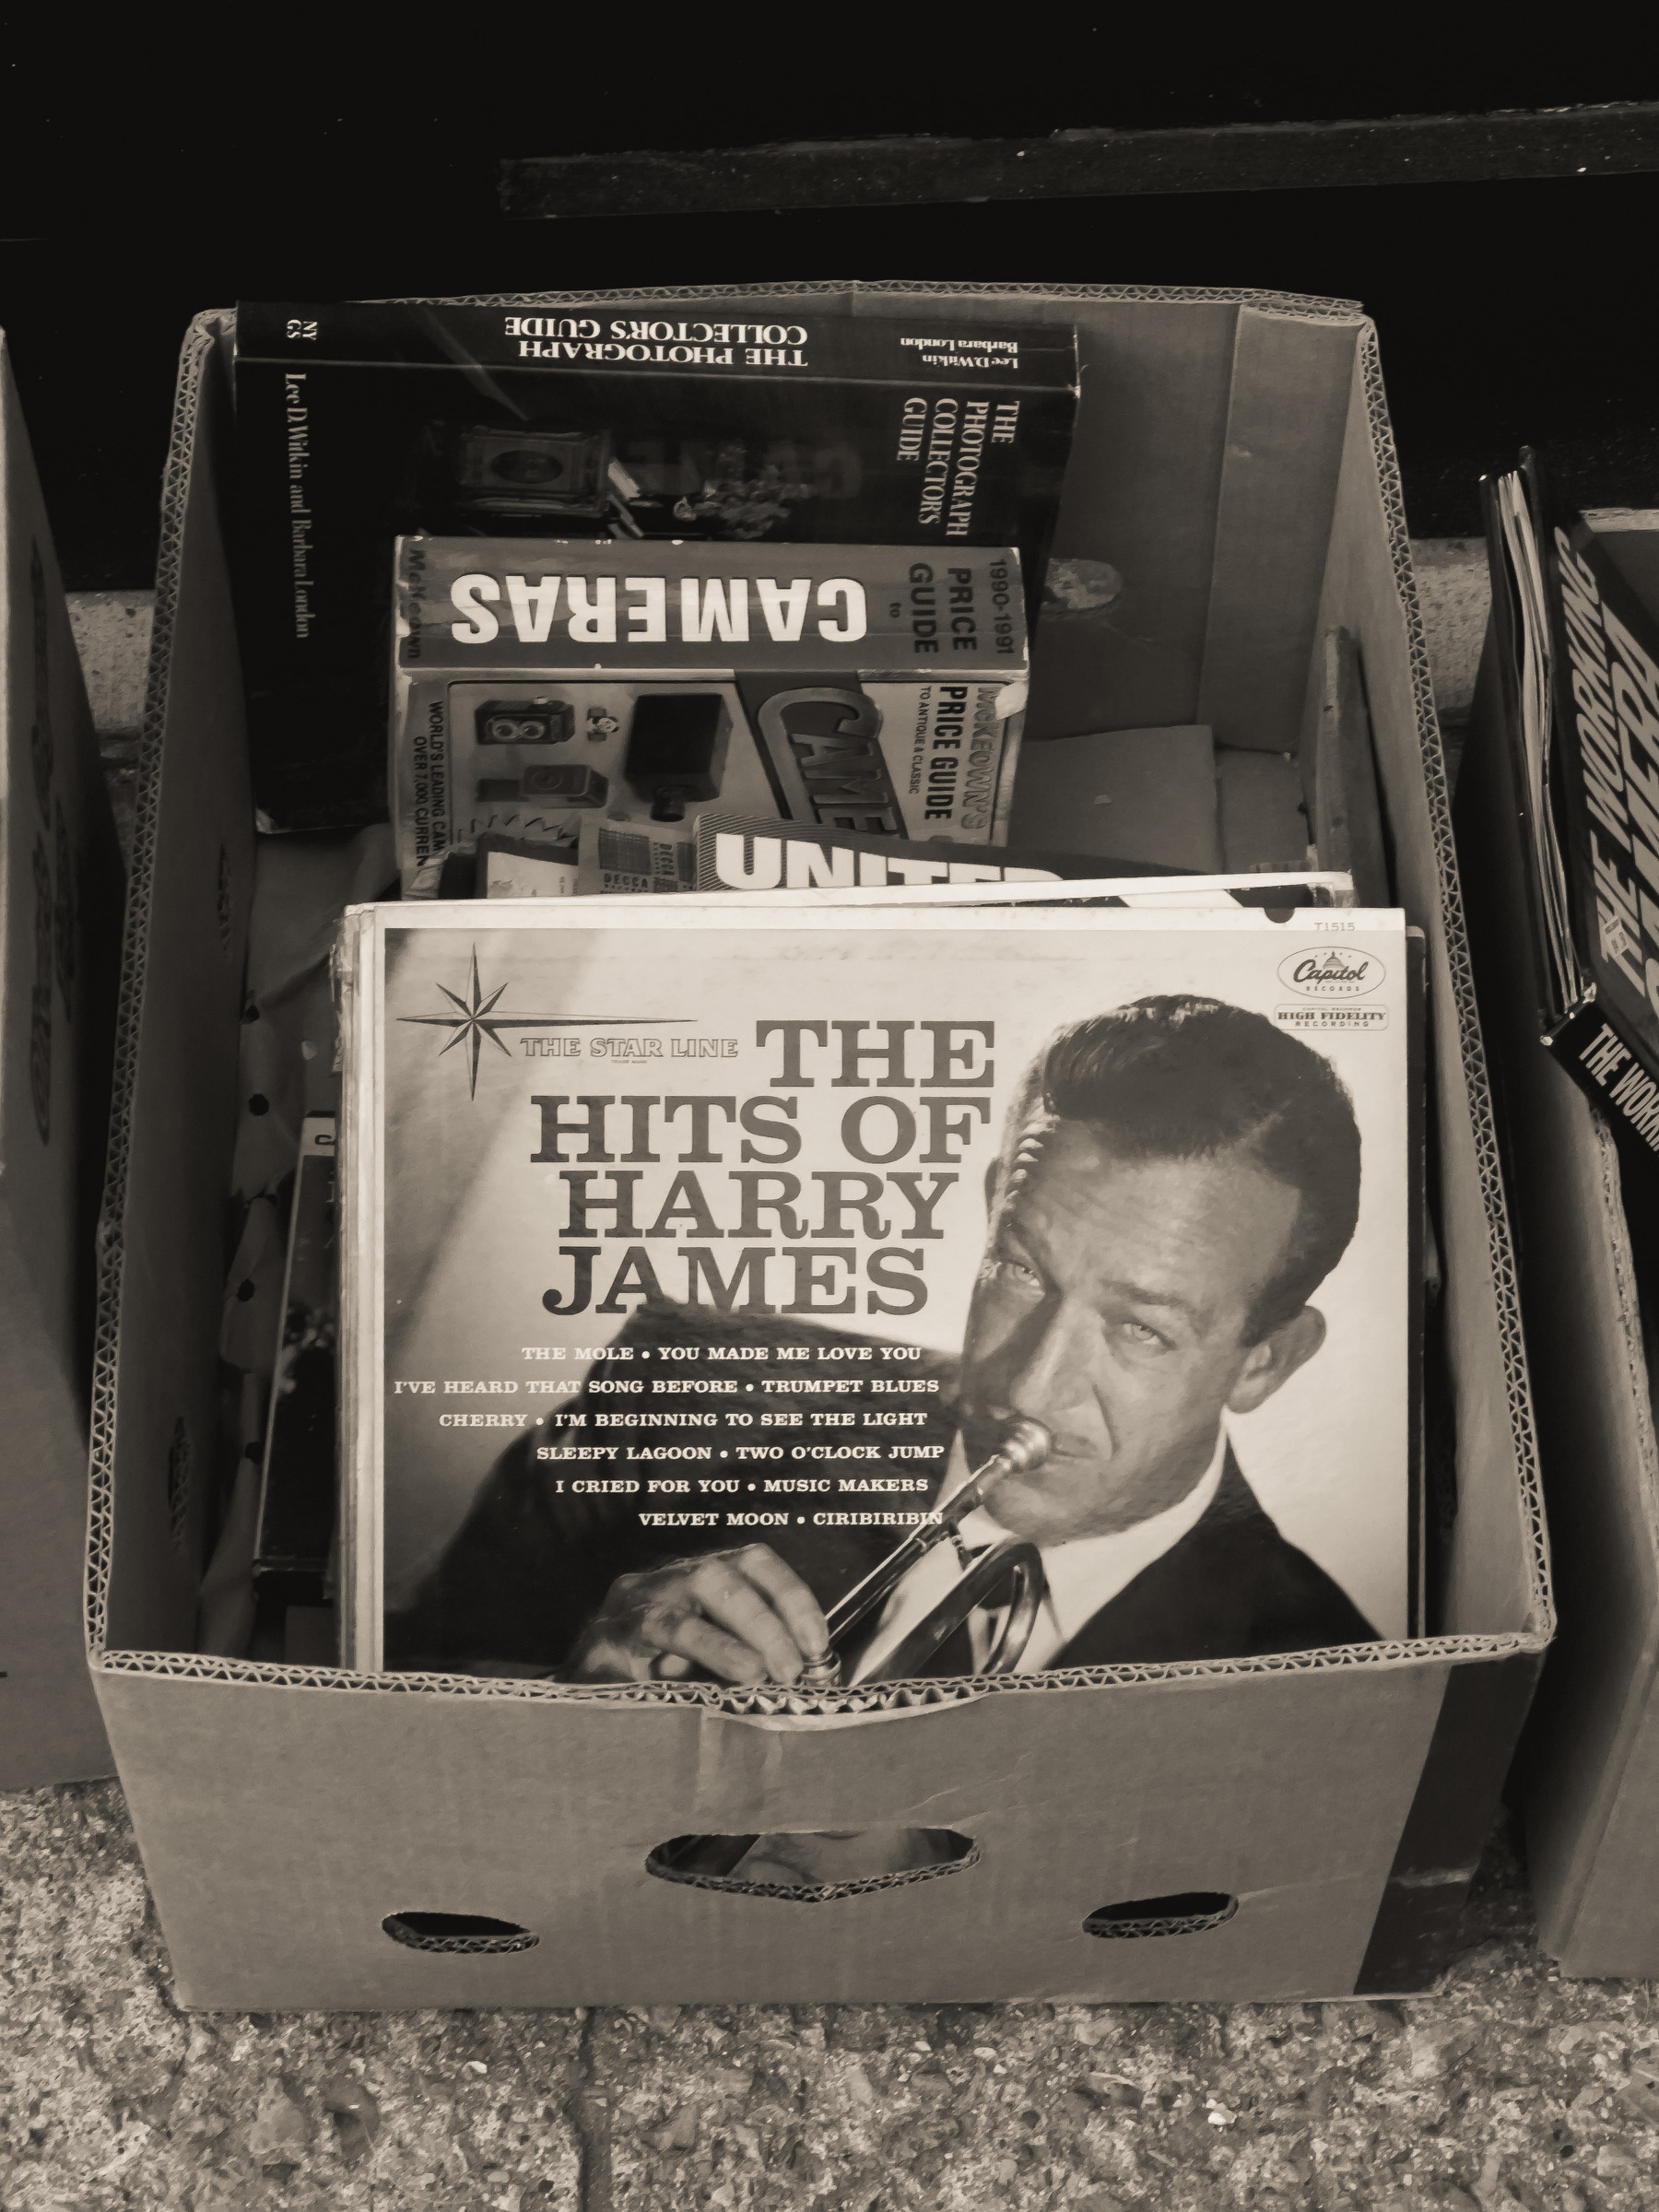 The Hits of Harry James vinyl record album in a box outside a shop.